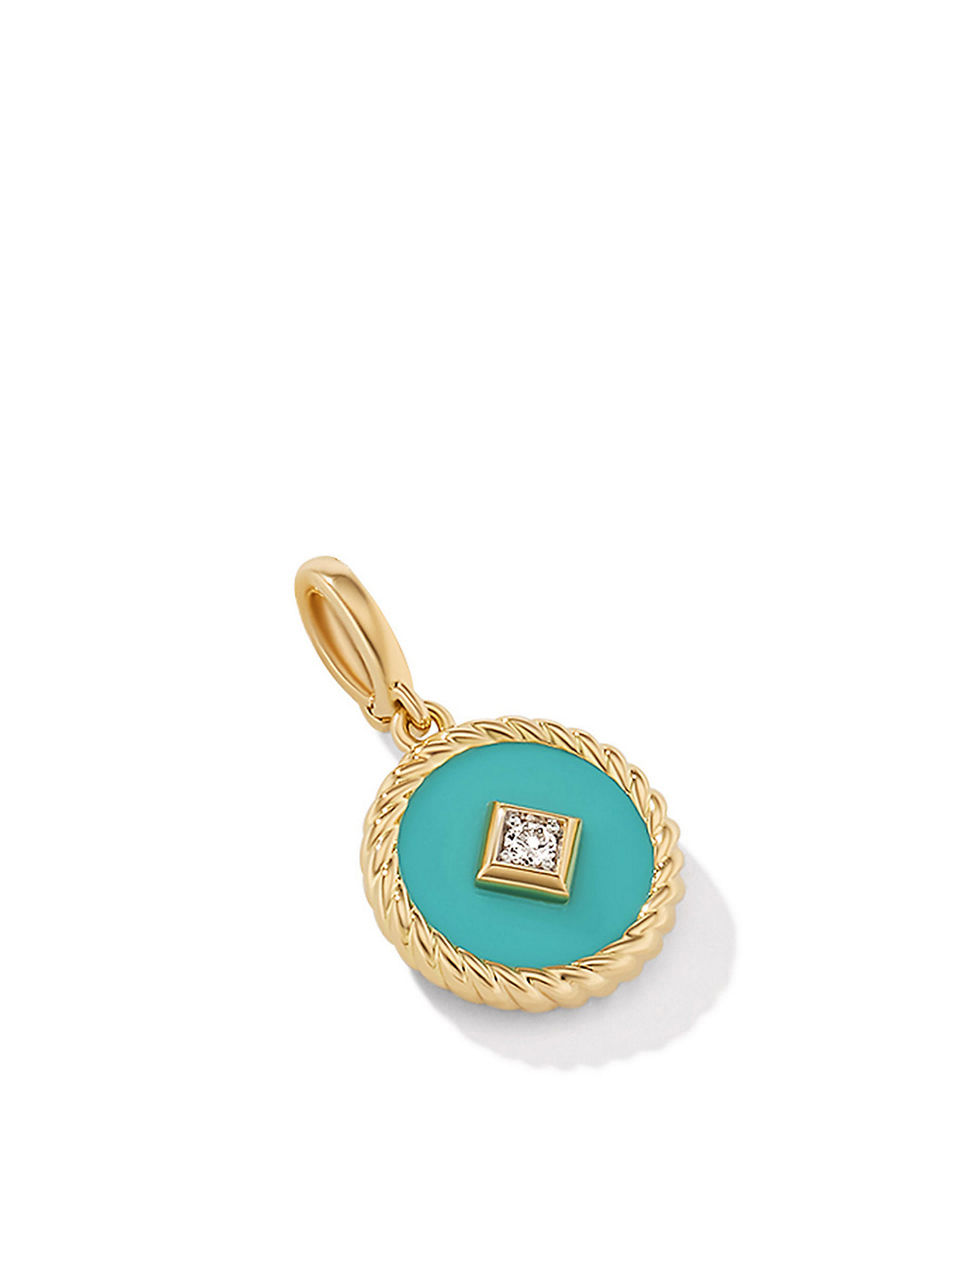 Cable Collectibles® Turquoise Enamel Charm In 18k Yellow Gold With Center Diamond